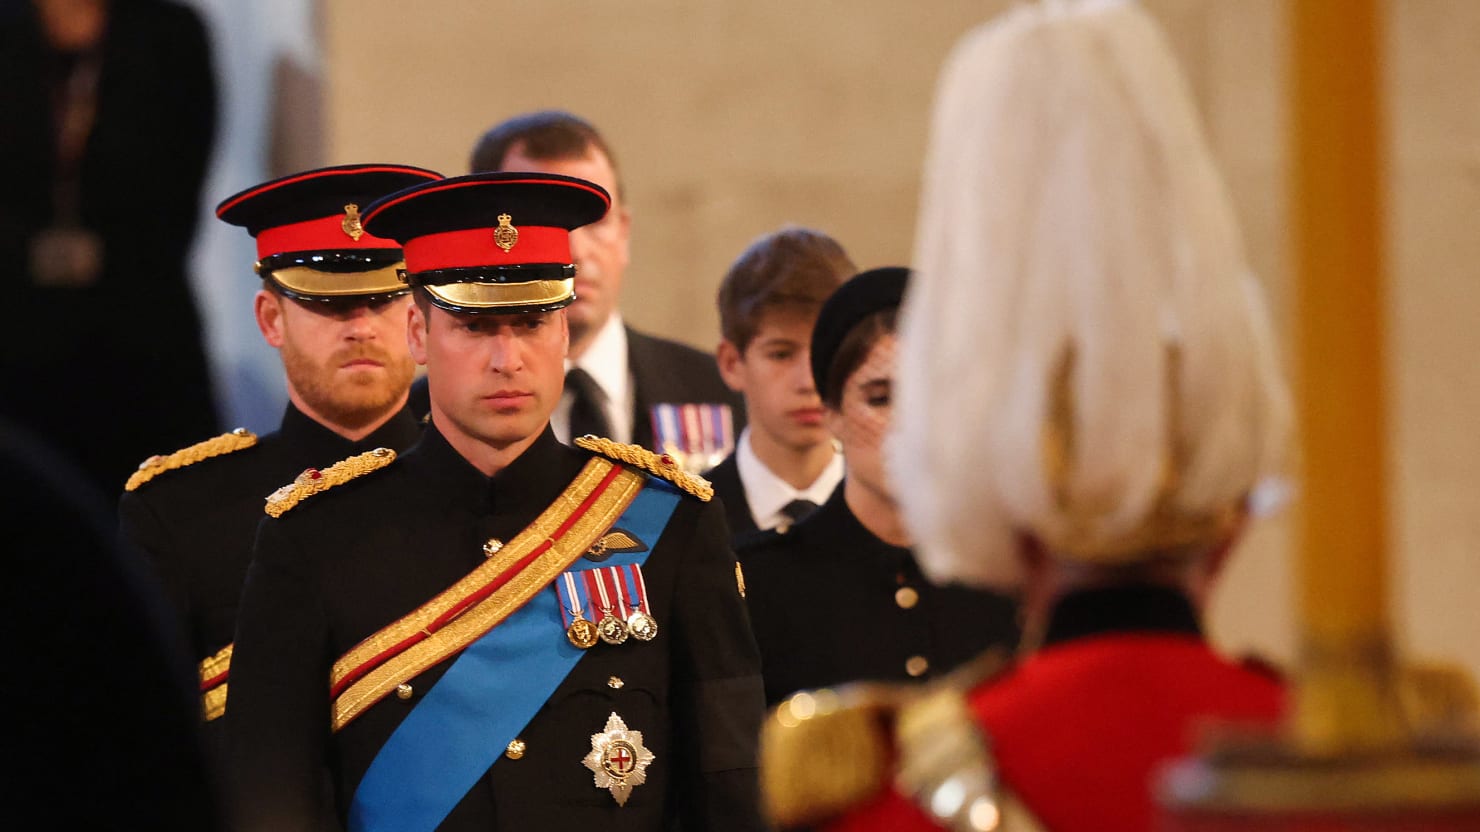 Prince Harry in Uniform United With Prince William at Vigil for Queen – The Daily Beast